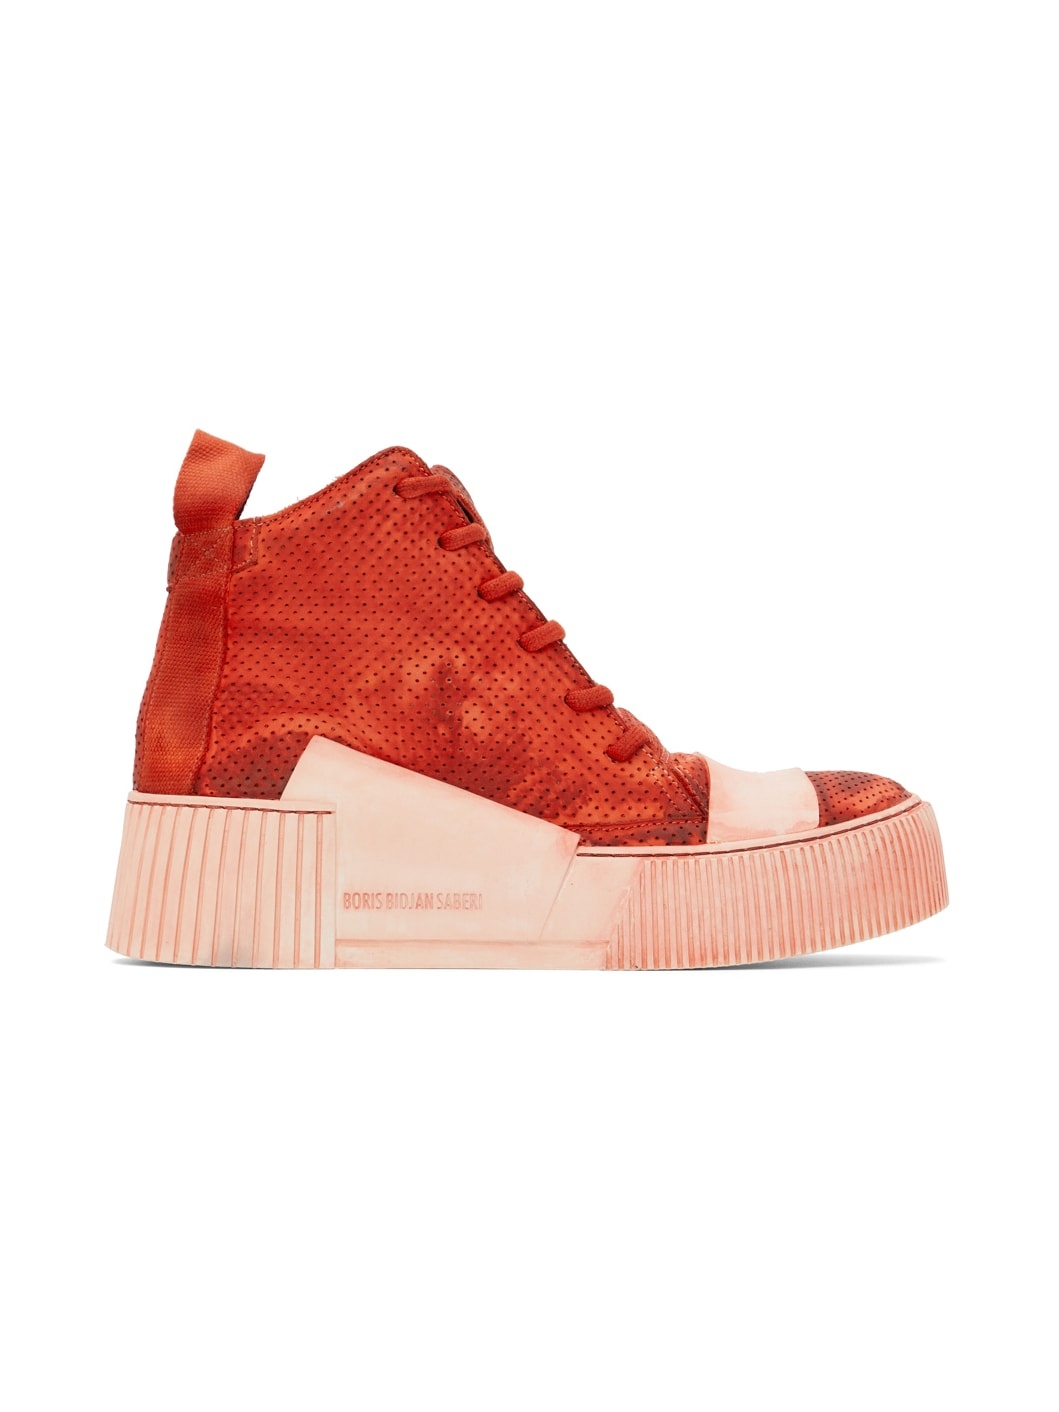 SSENSE Exclusive Red Bamba 1.1 Sneakers - 1